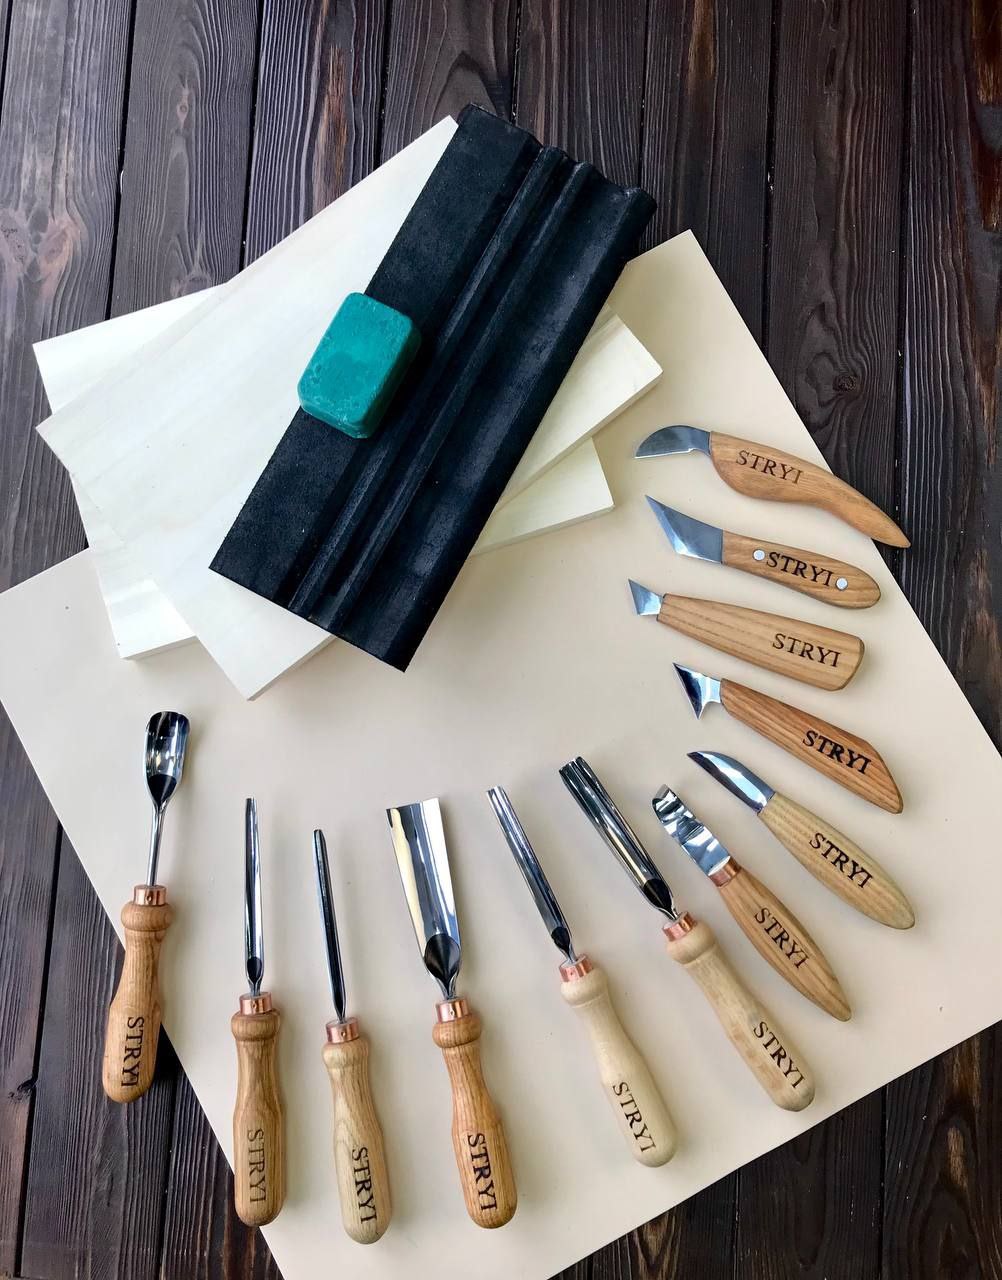 Wood carving versatile tools set 12 pcs chisels and gouges  STRYI Profi, tools for wood carving professional carving tools wood working tool